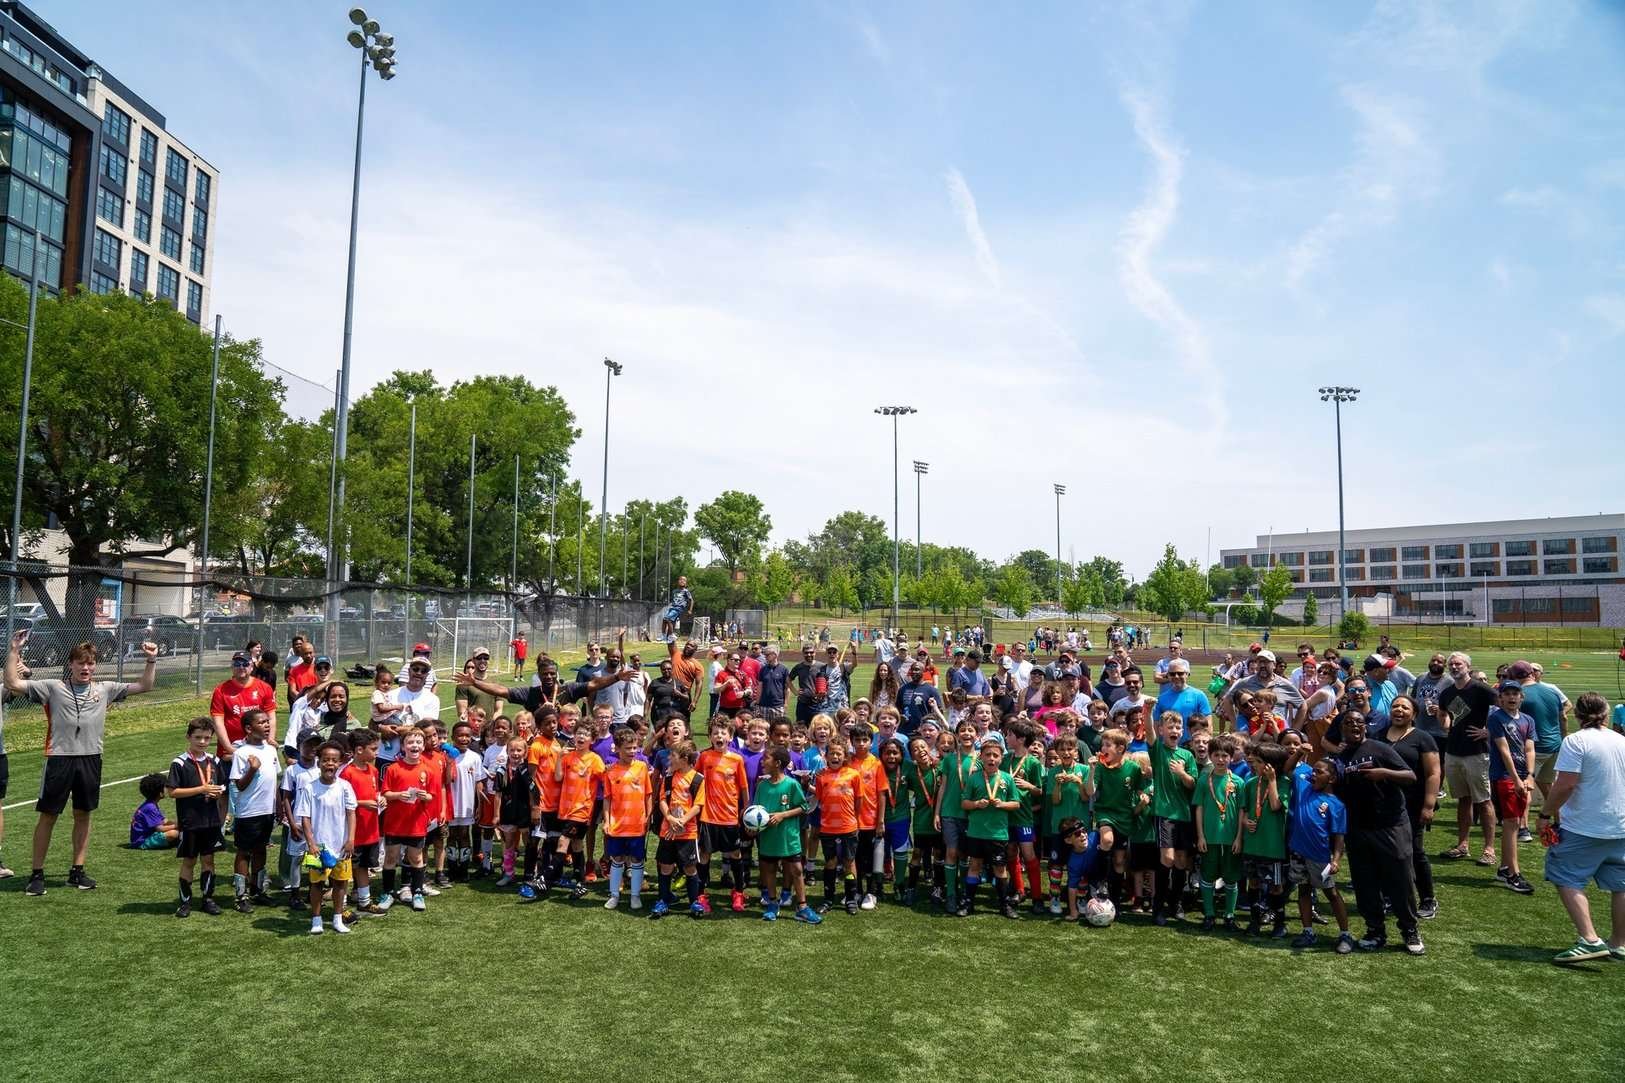 Dc-way-soccer-club-for-kids-in-washington-dc-capitol-hill-league-at-brentwood-hamilton-park-06-03-2023 0174.jpg